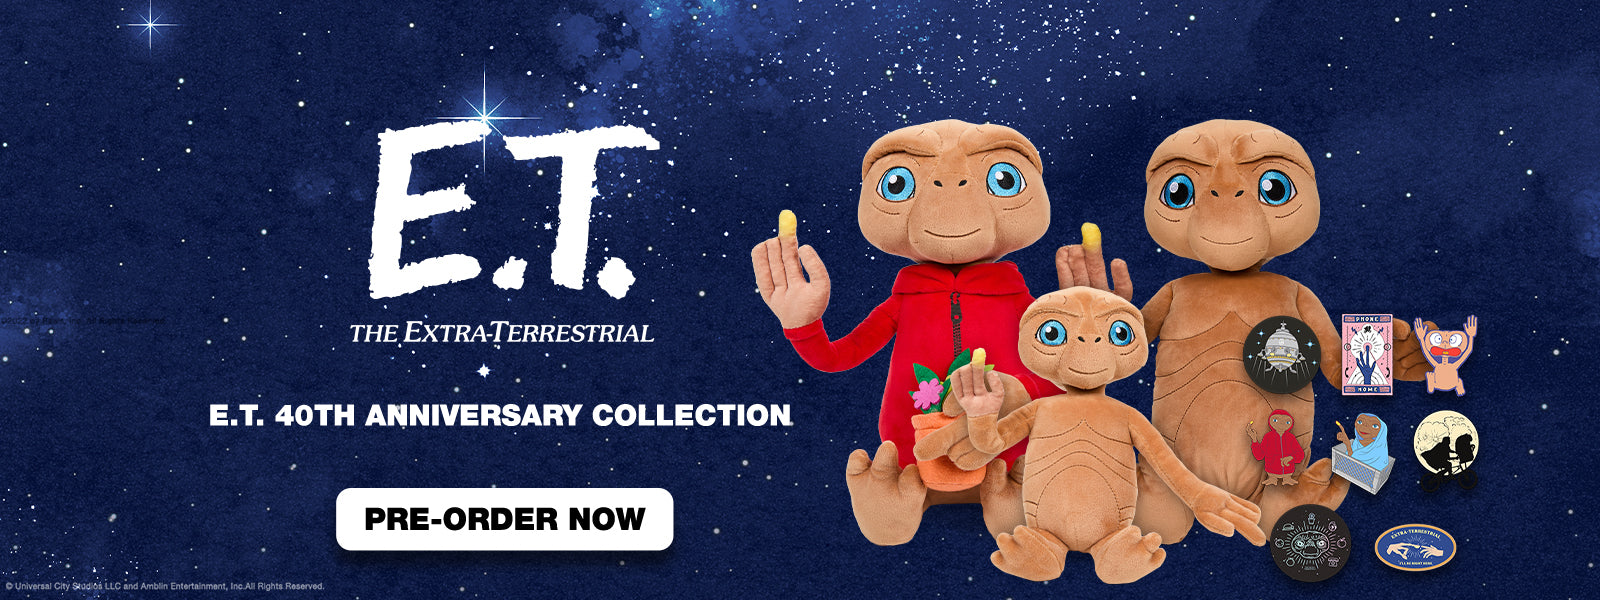 ET the Extra-Terrestrial 40th Anniversary Collection at Kidrobot.com - E.T. Plush Toys and collectible pins